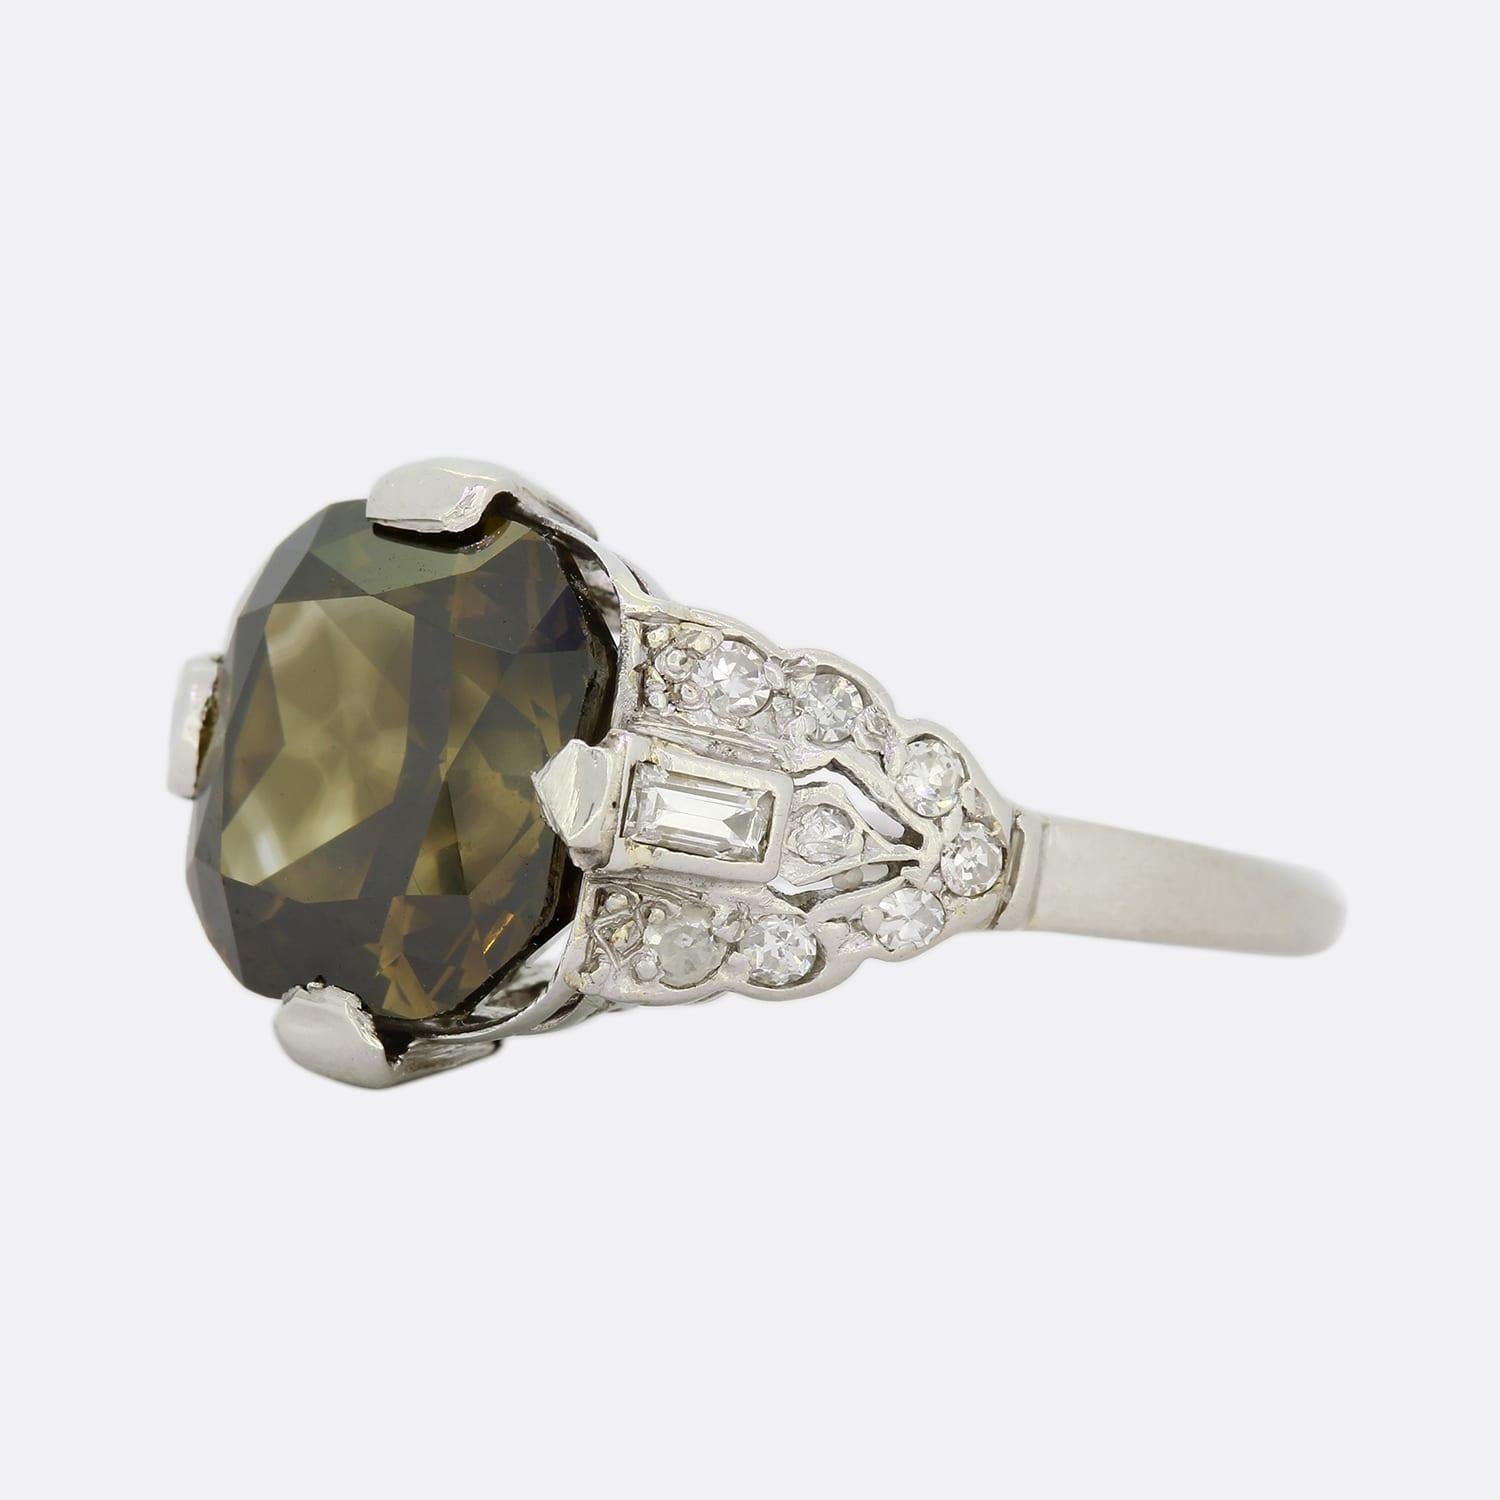 This is a wonderful diamond ring from the Art Deco period. The cushion cut diamond is a natural fancy dark yellow grey and sits in an Art Deco ring mount which has been set with baguette and single cut diamonds. If you want an engagement ring that's